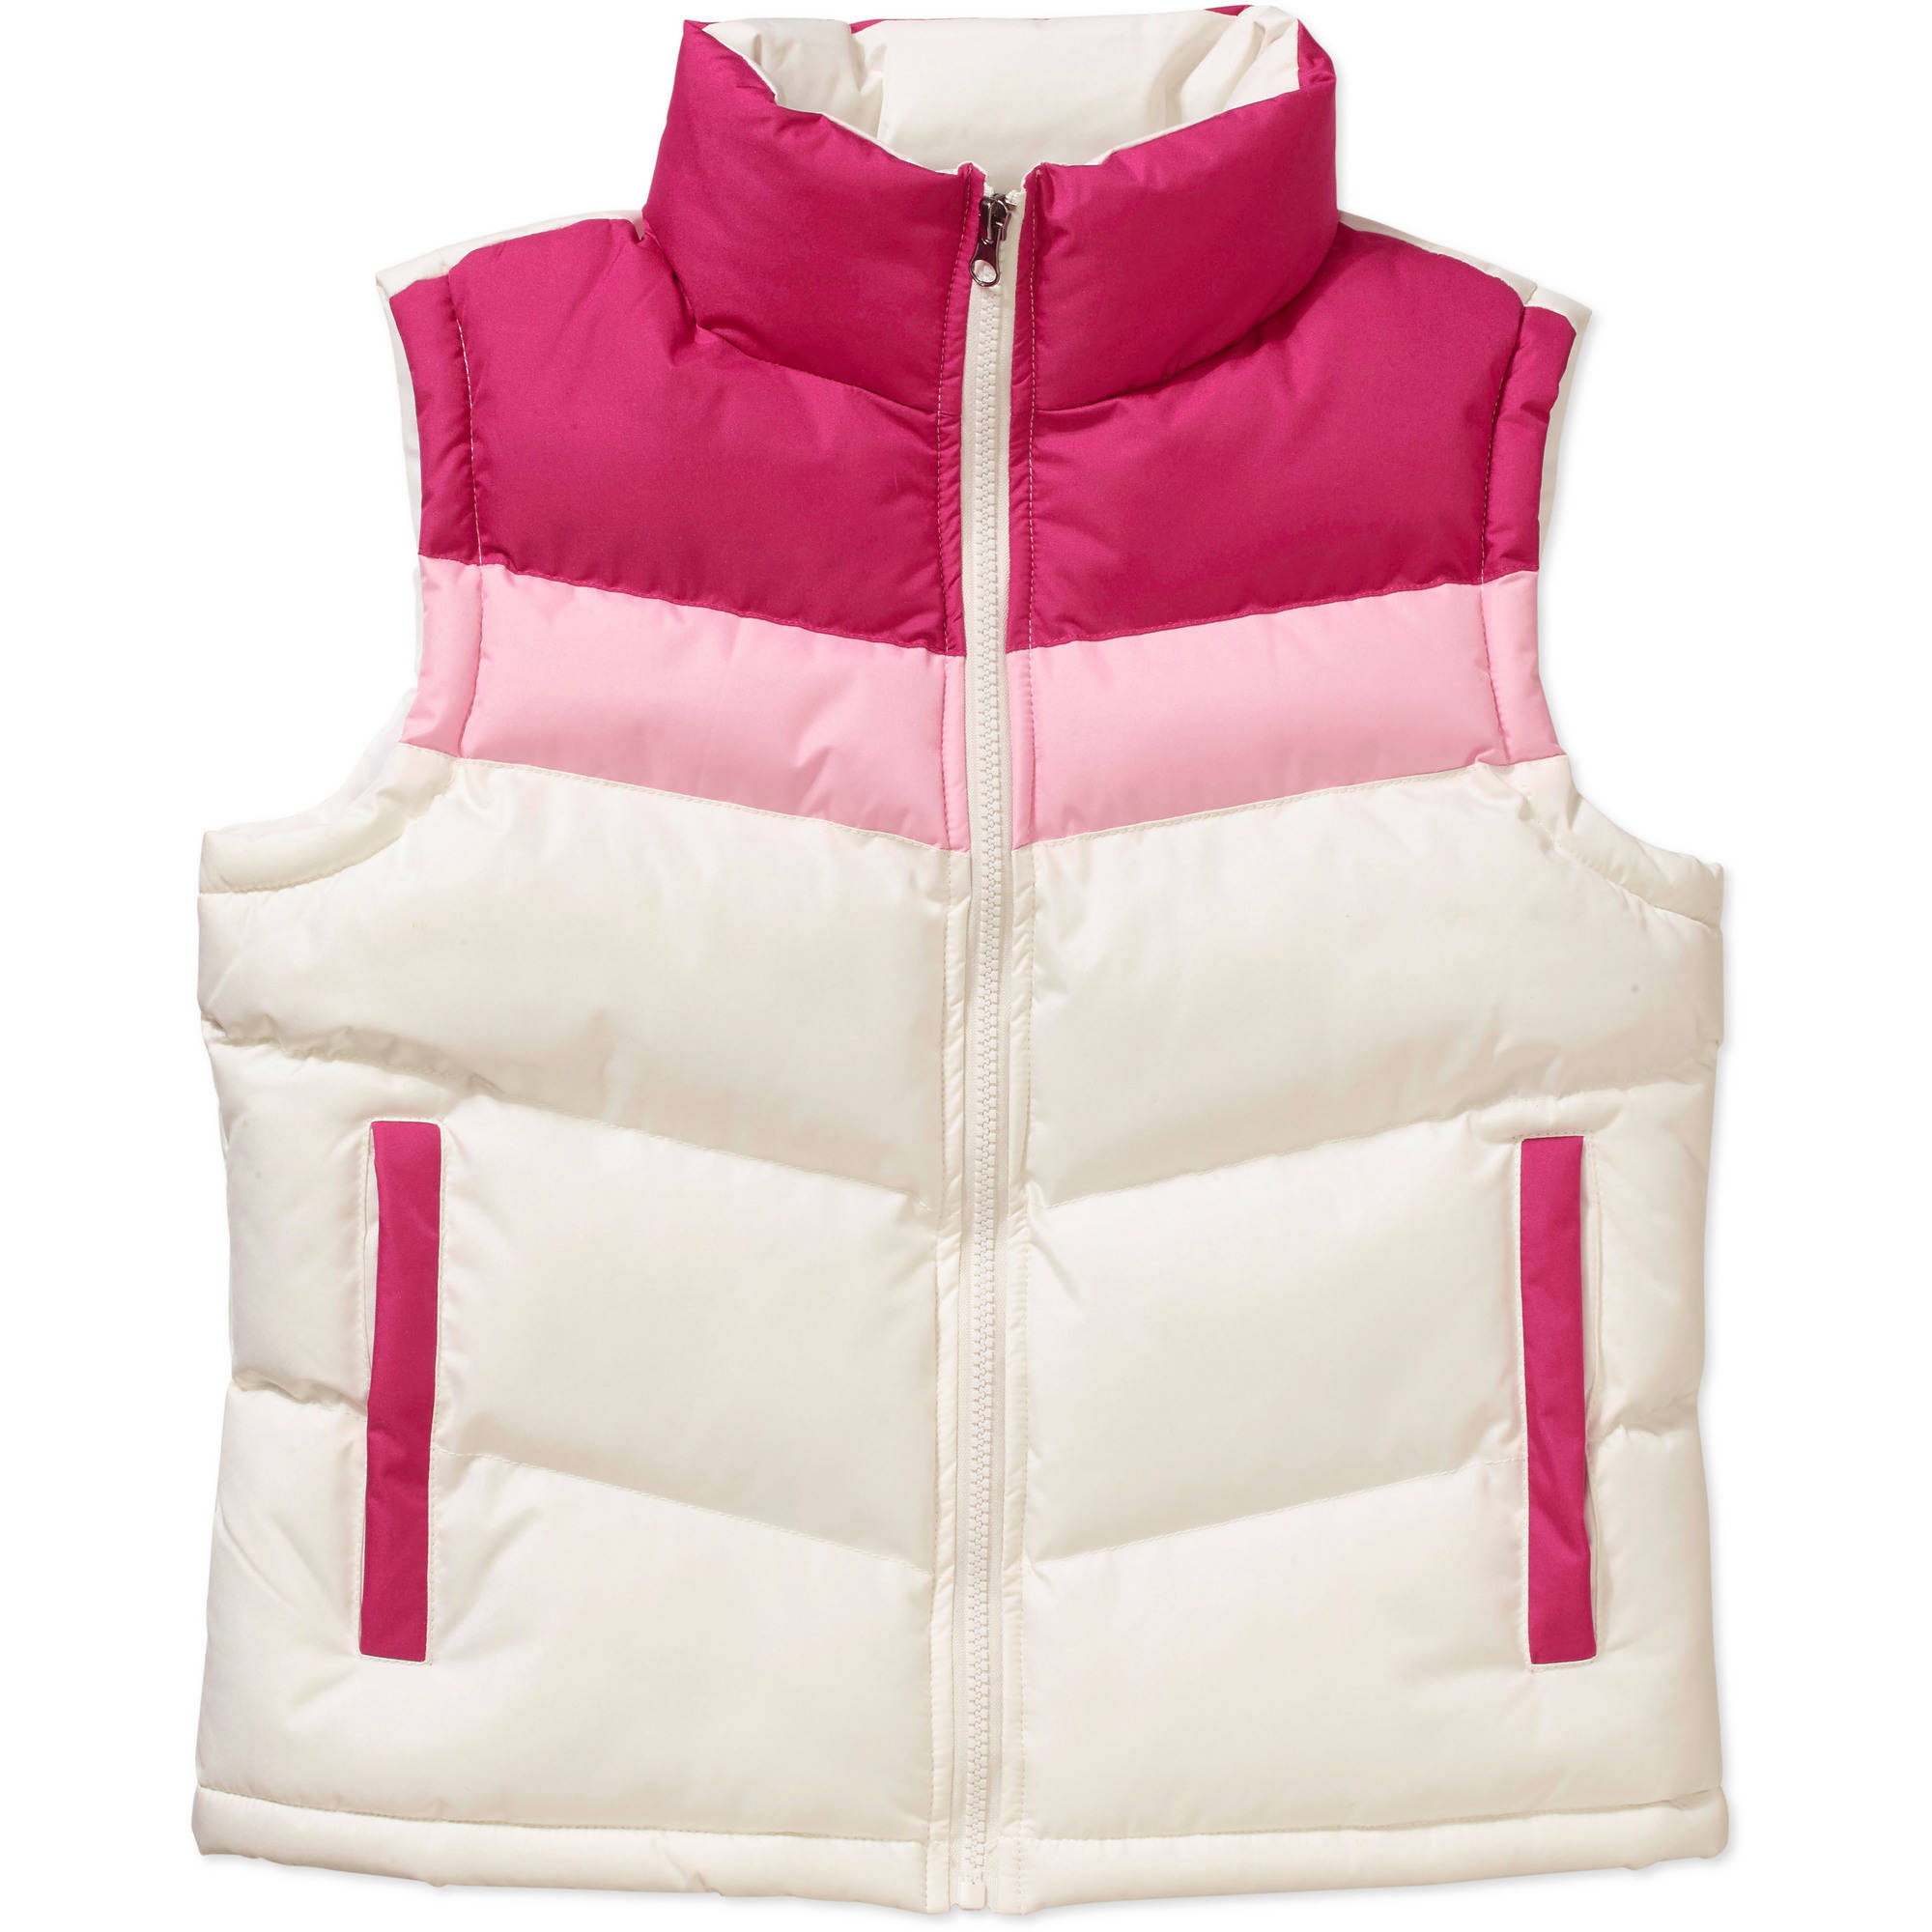 Climate Concepts Girls' Color Blocked Pu - image 1 of 1